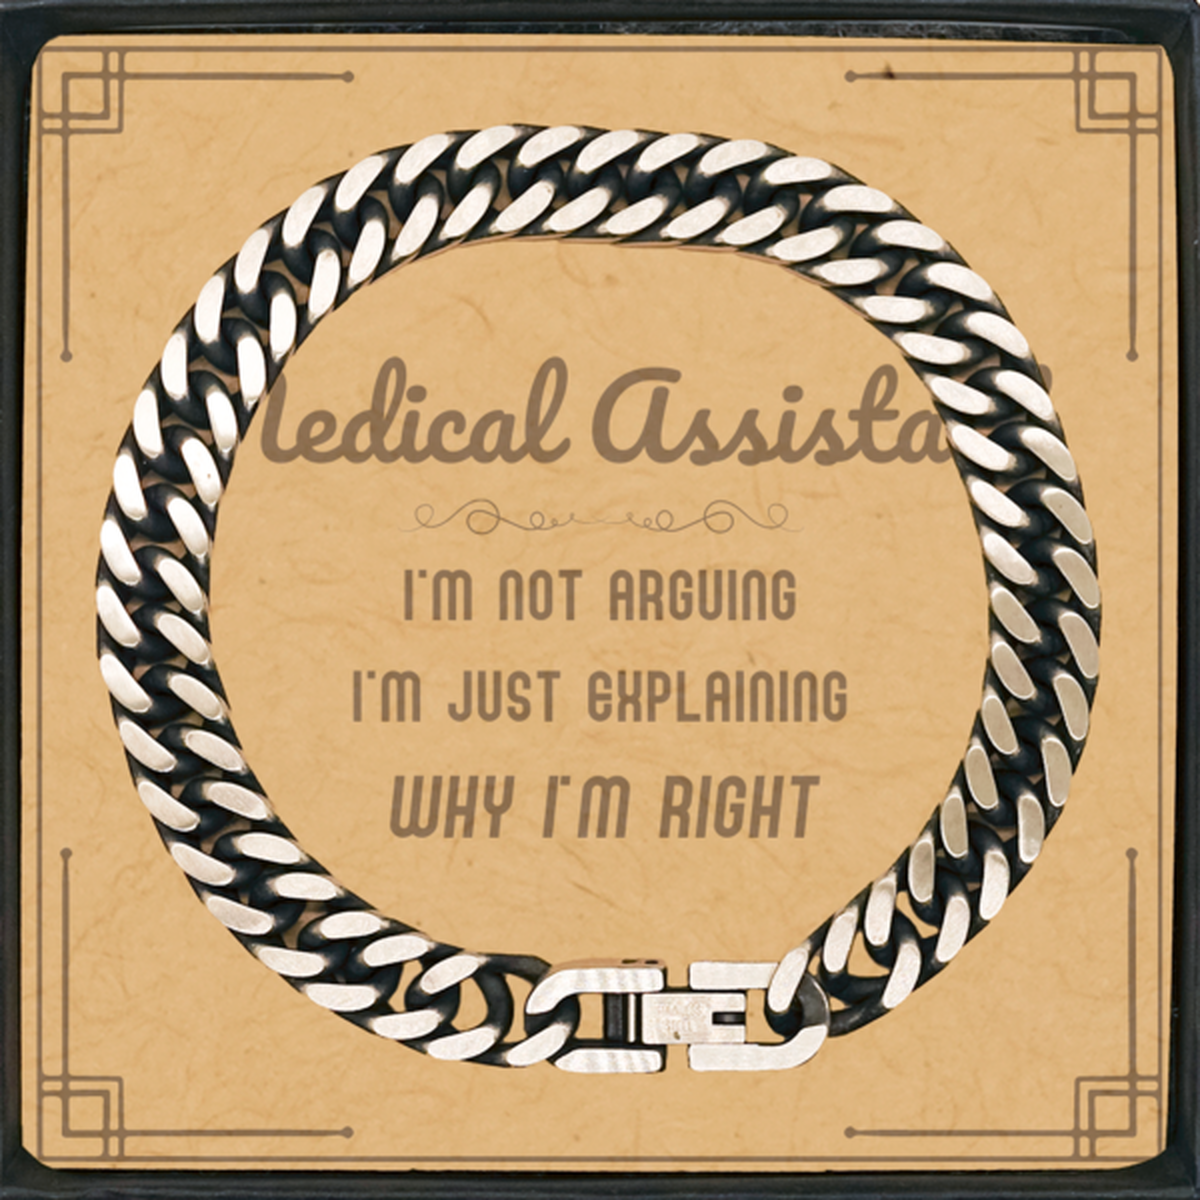 Medical Assistant I'm not Arguing. I'm Just Explaining Why I'm RIGHT Cuban Link Chain Bracelet, Funny Saying Quote Medical Assistant Gifts For Medical Assistant Message Card Graduation Birthday Christmas Gifts for Men Women Coworker